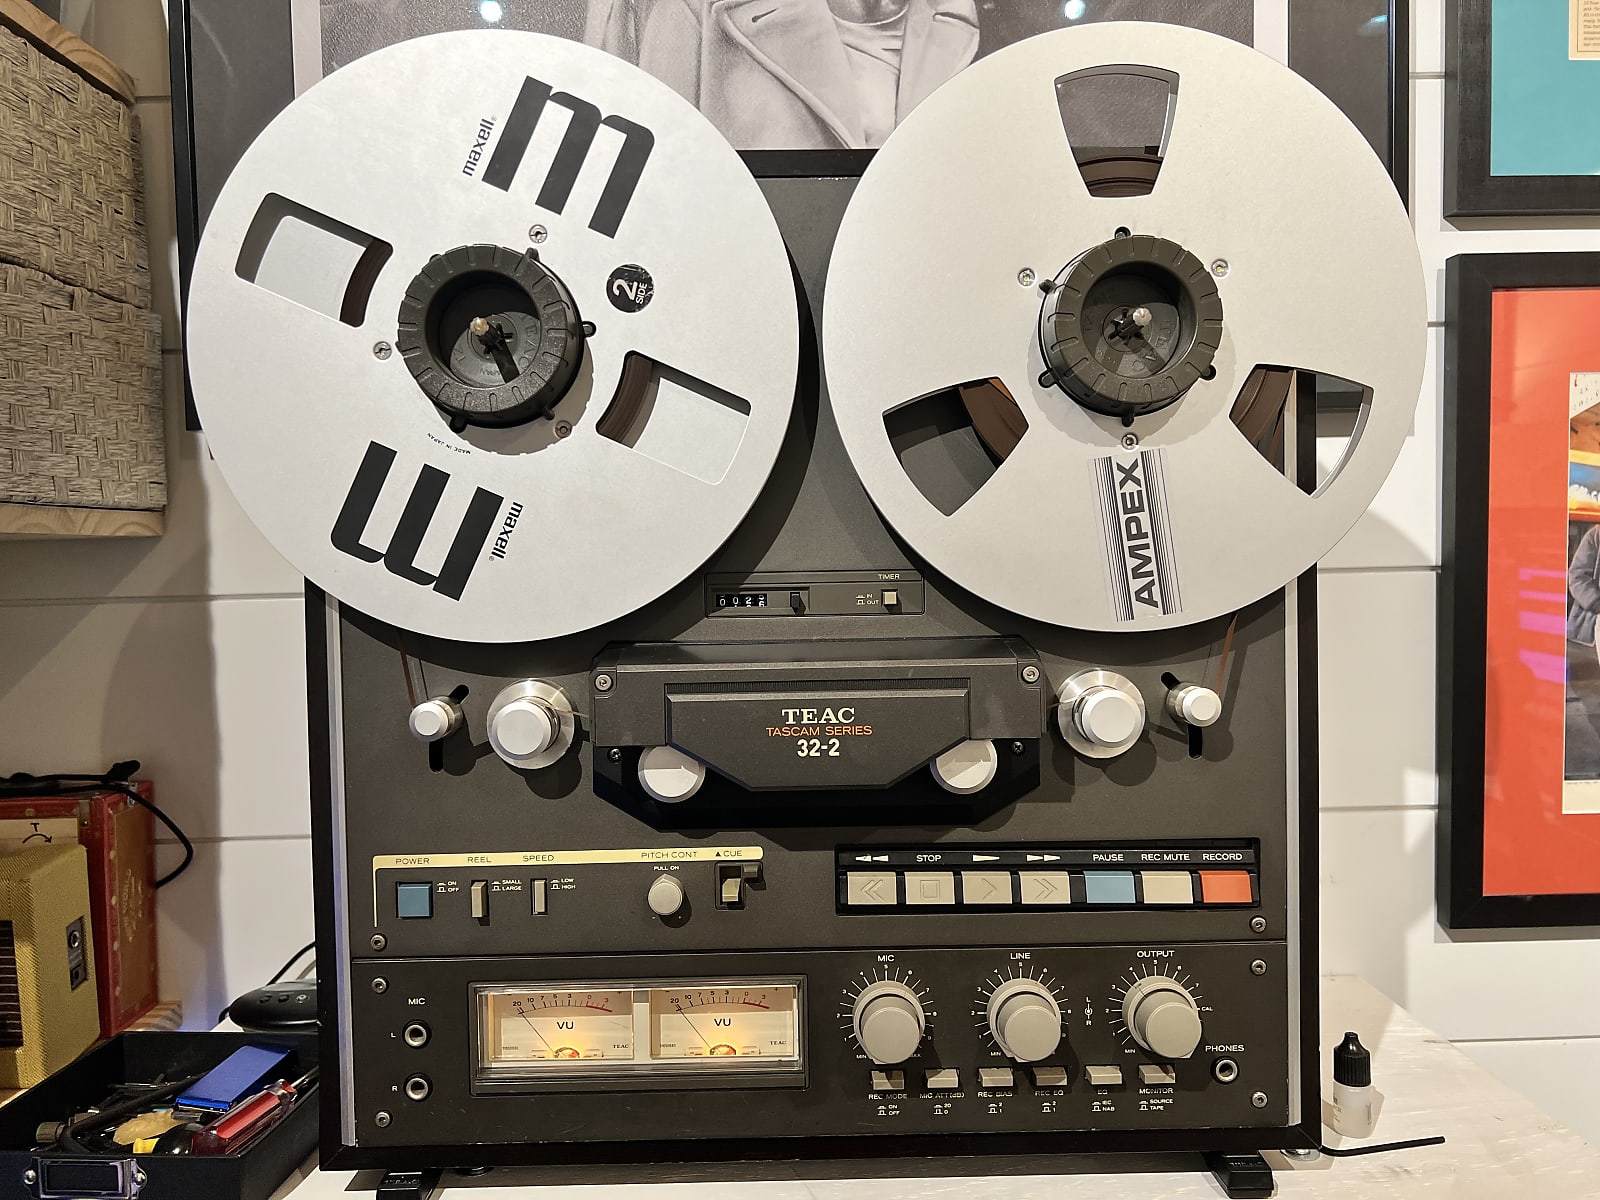 TASCAM 32-2 1/4 2-Track Reel to Reel Tape Recorder | Reverb Canada